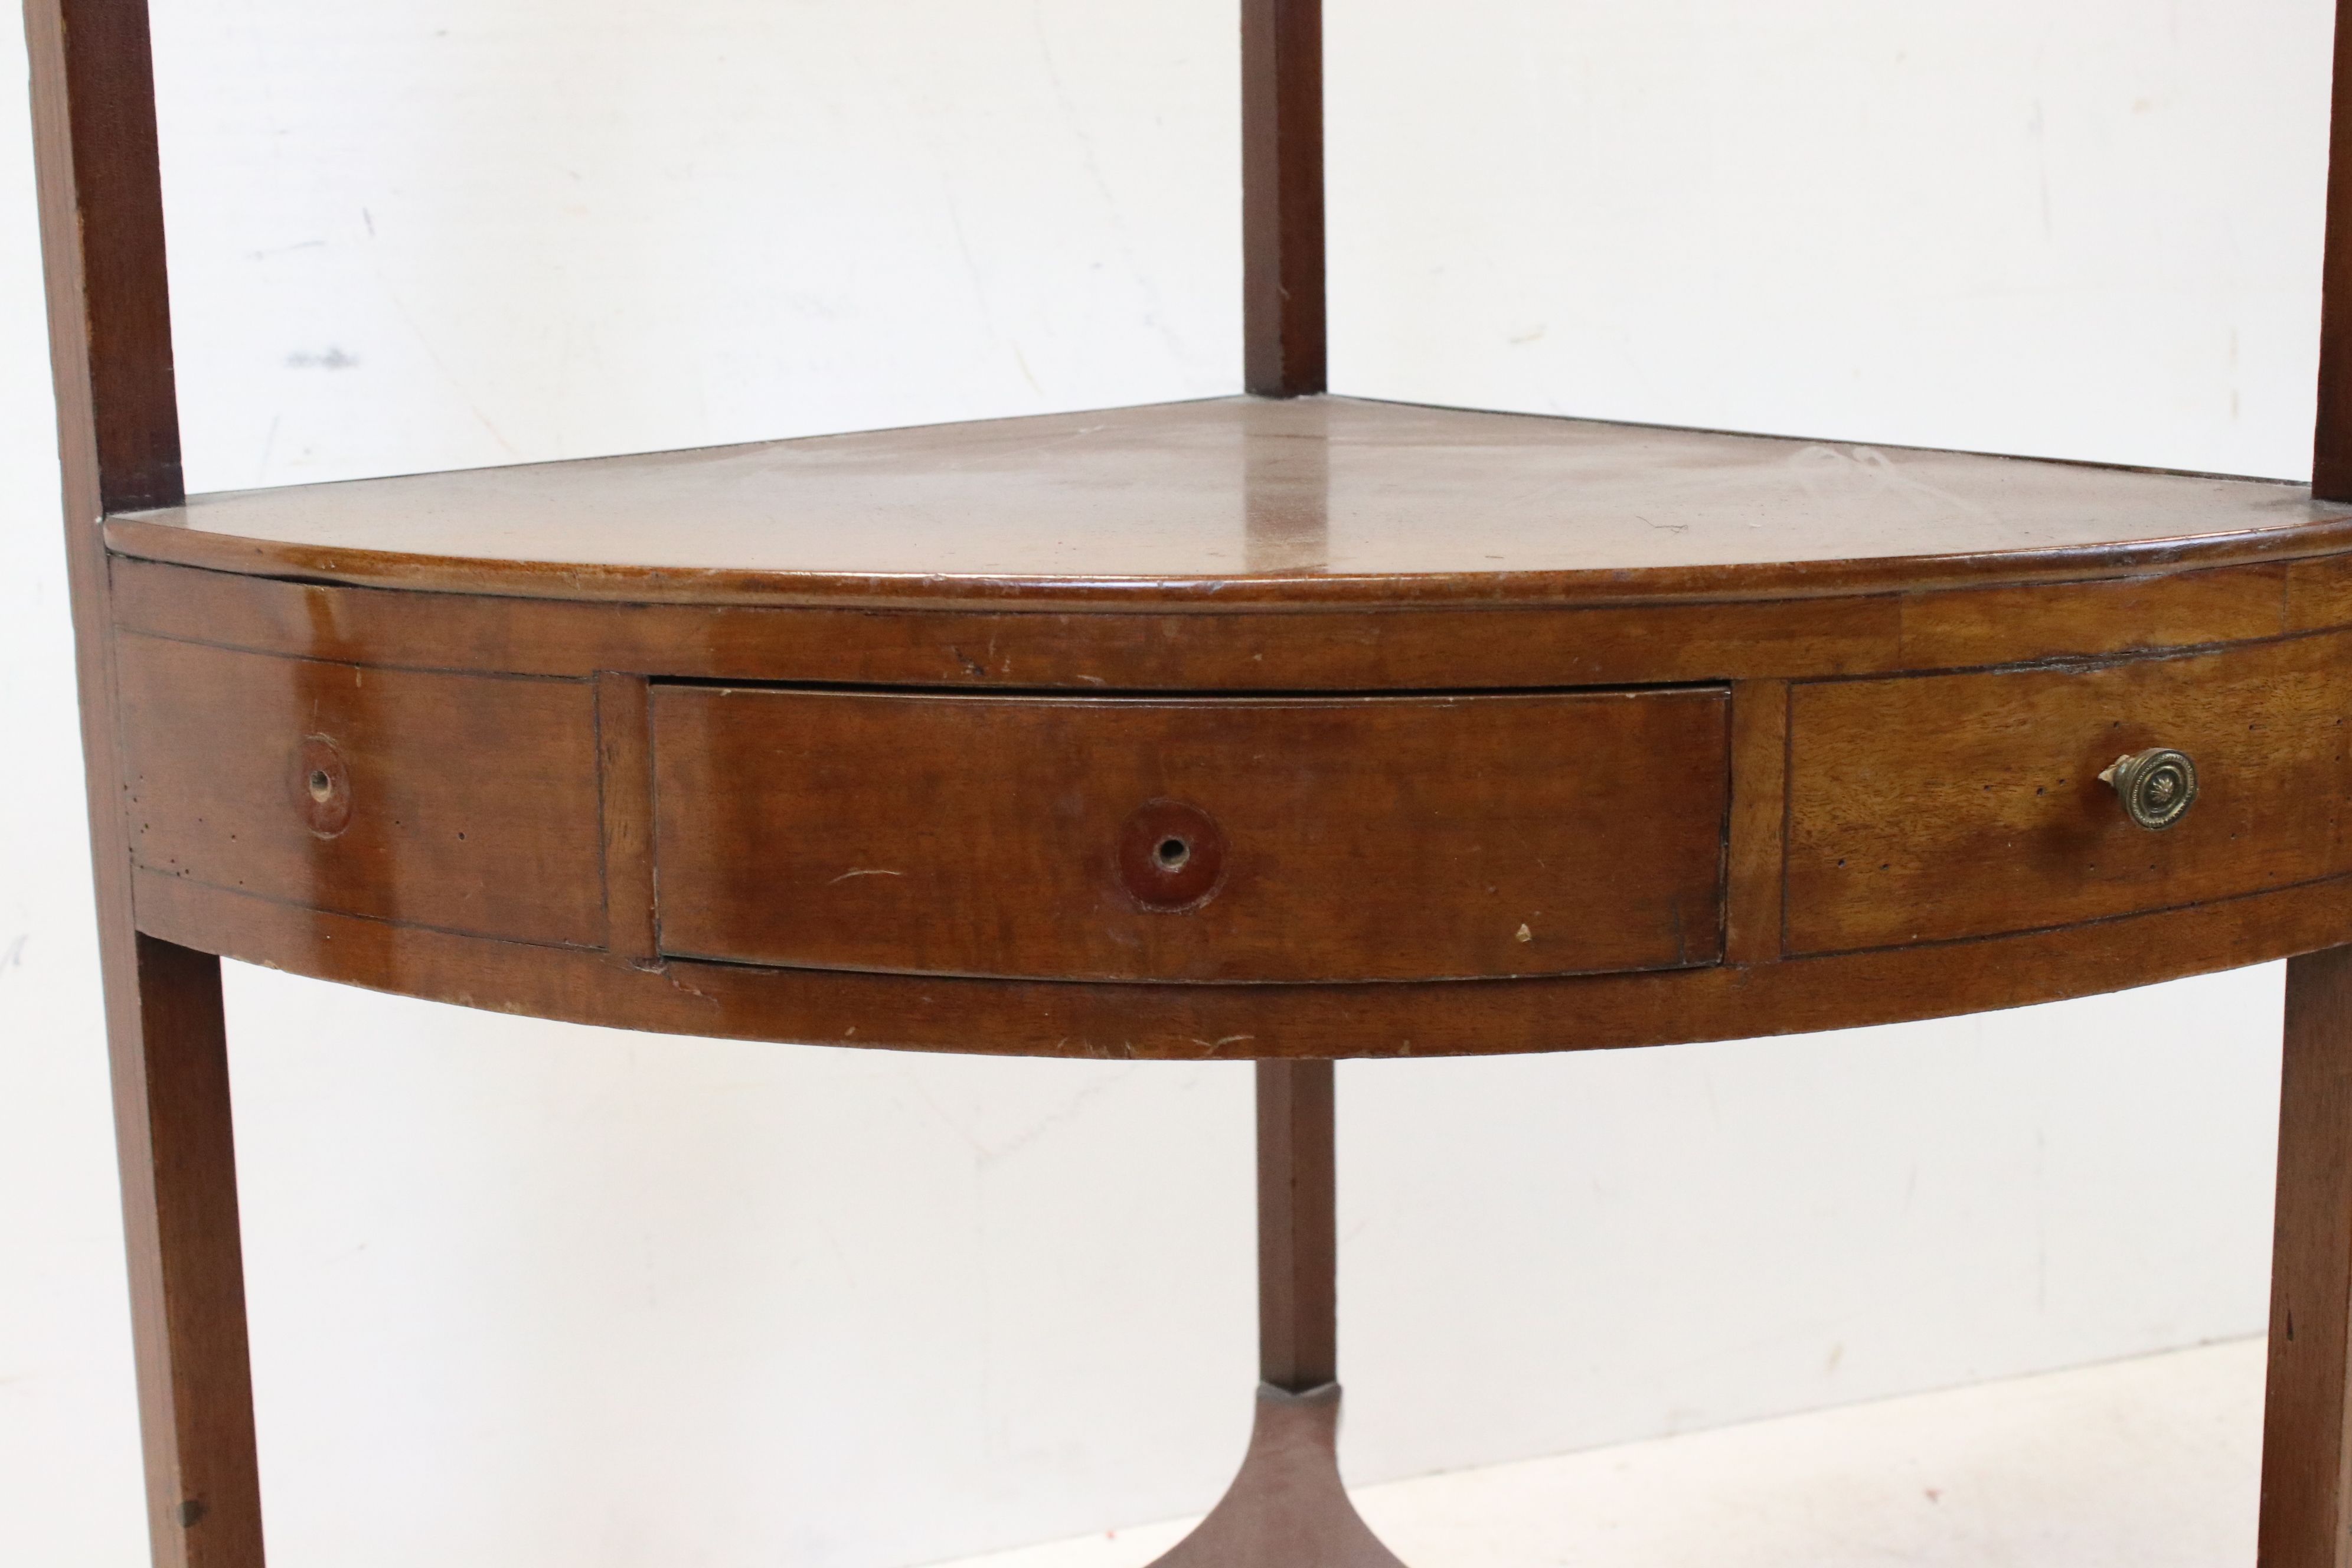 Early 19th century Mahogany Bow Fronted Corner Washstand, 115cms high - Image 2 of 2